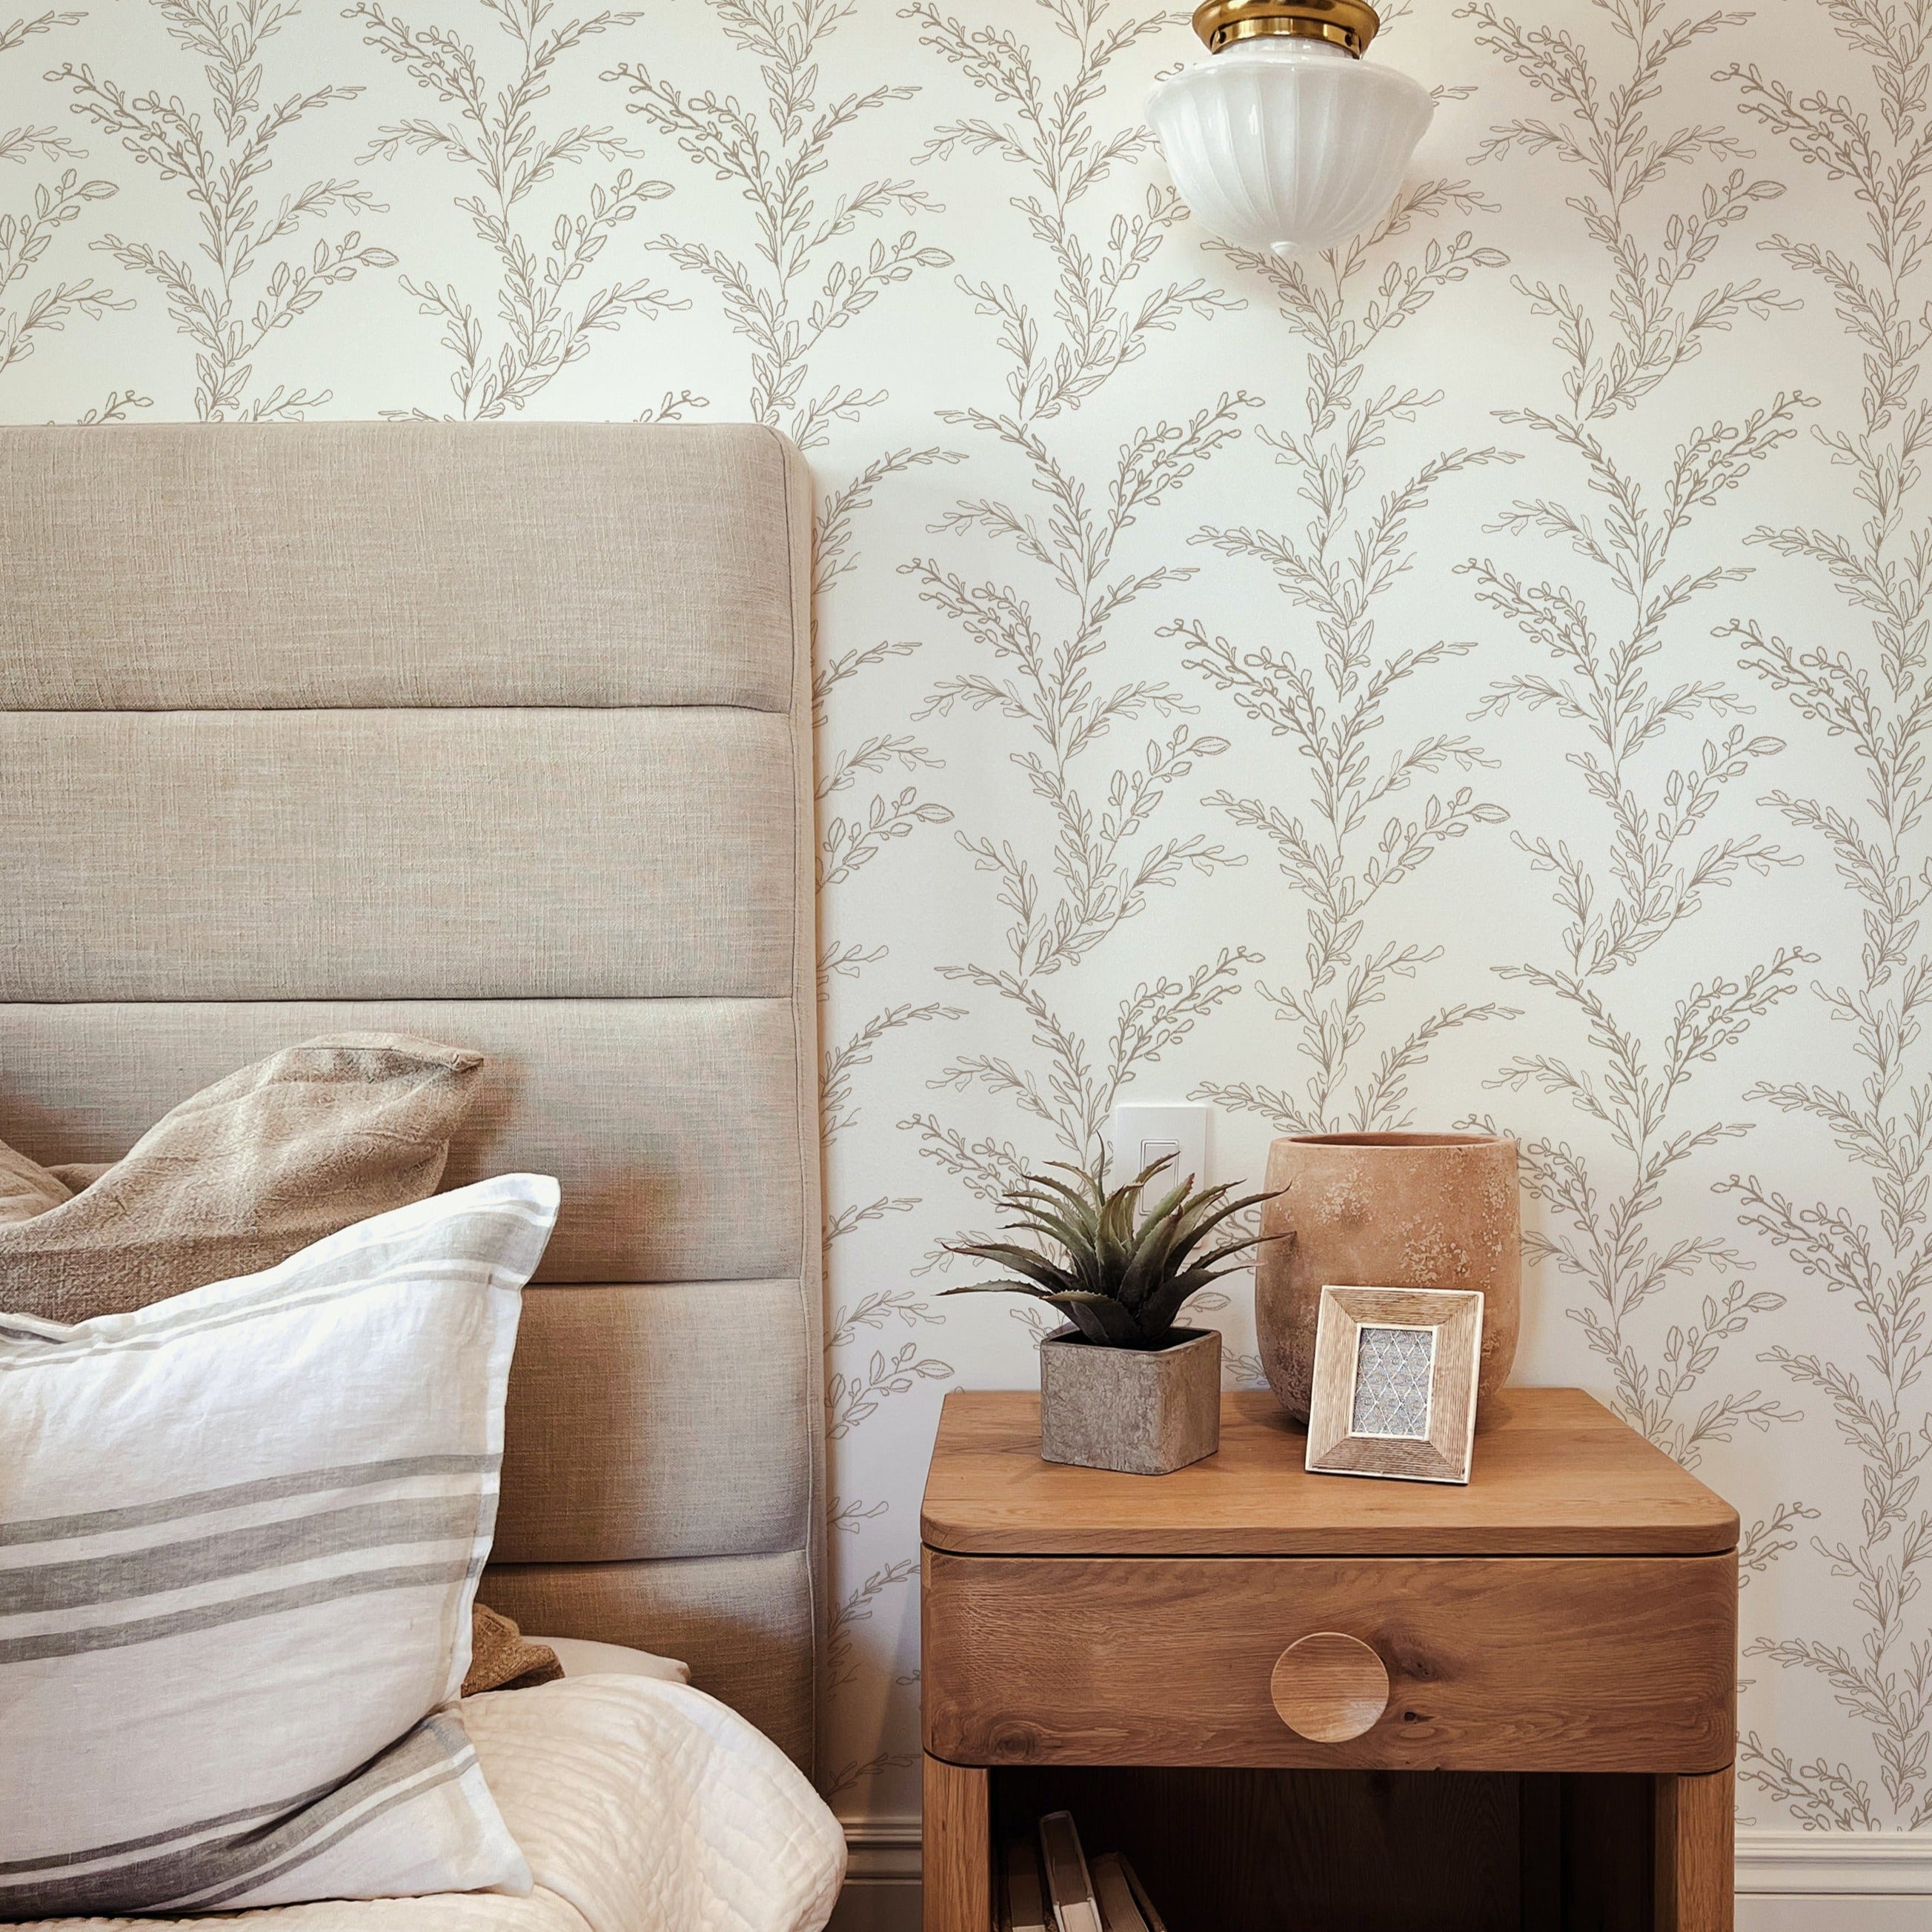 Peel and Stick Wallpaper in the Office at Modern Farmhouse Glam  Modern  Farmhouse Glam